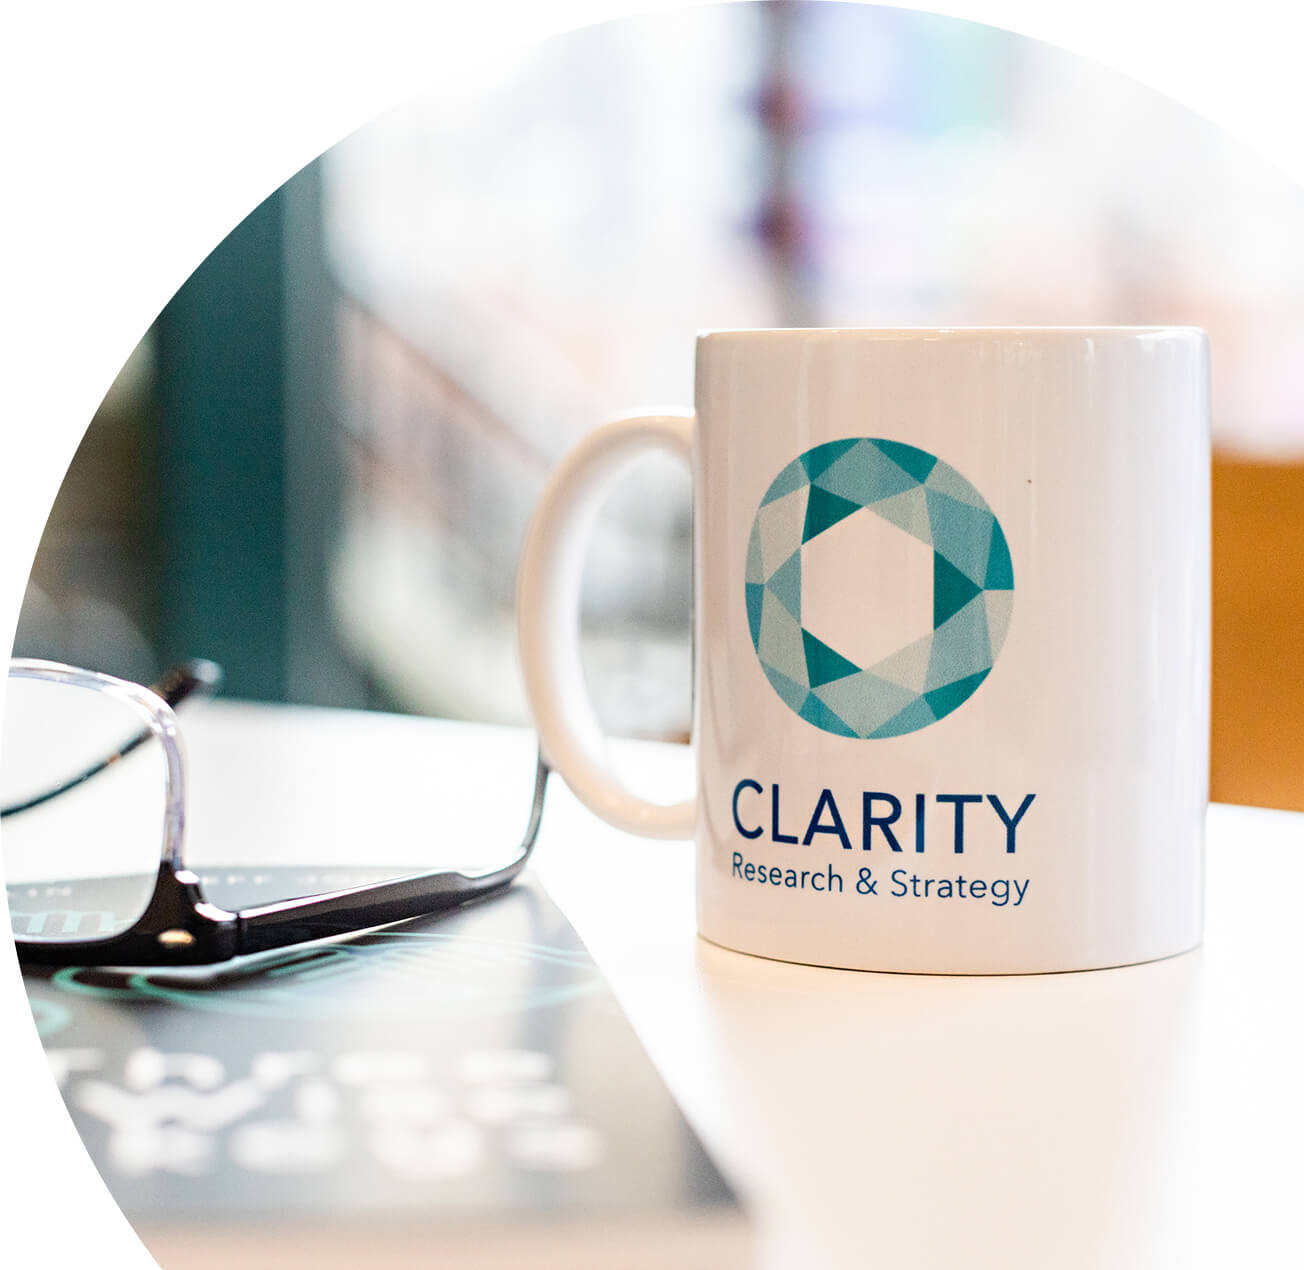 Market Research Case Studies by CLARITY Research and Strategy